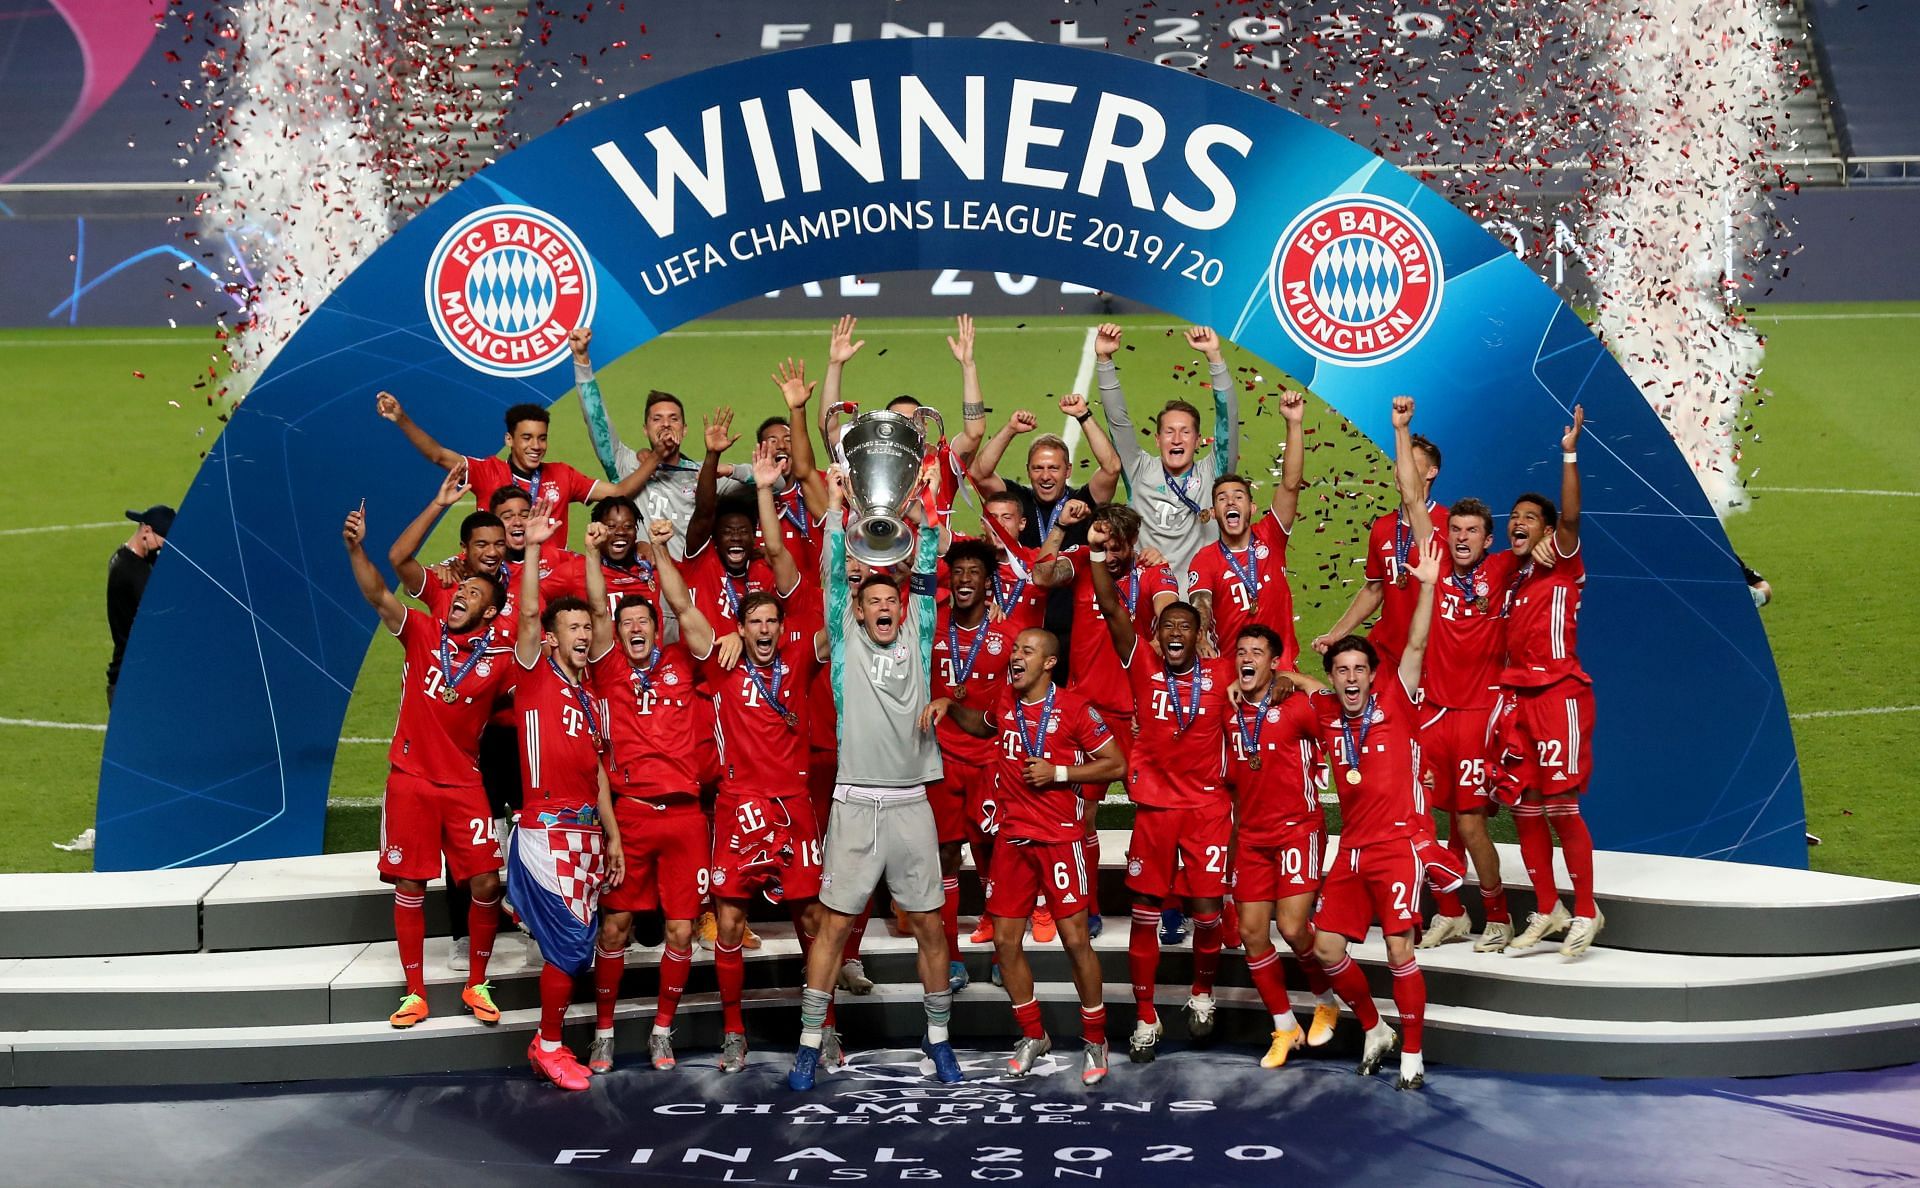 Bayern Munich are strong contenders this season